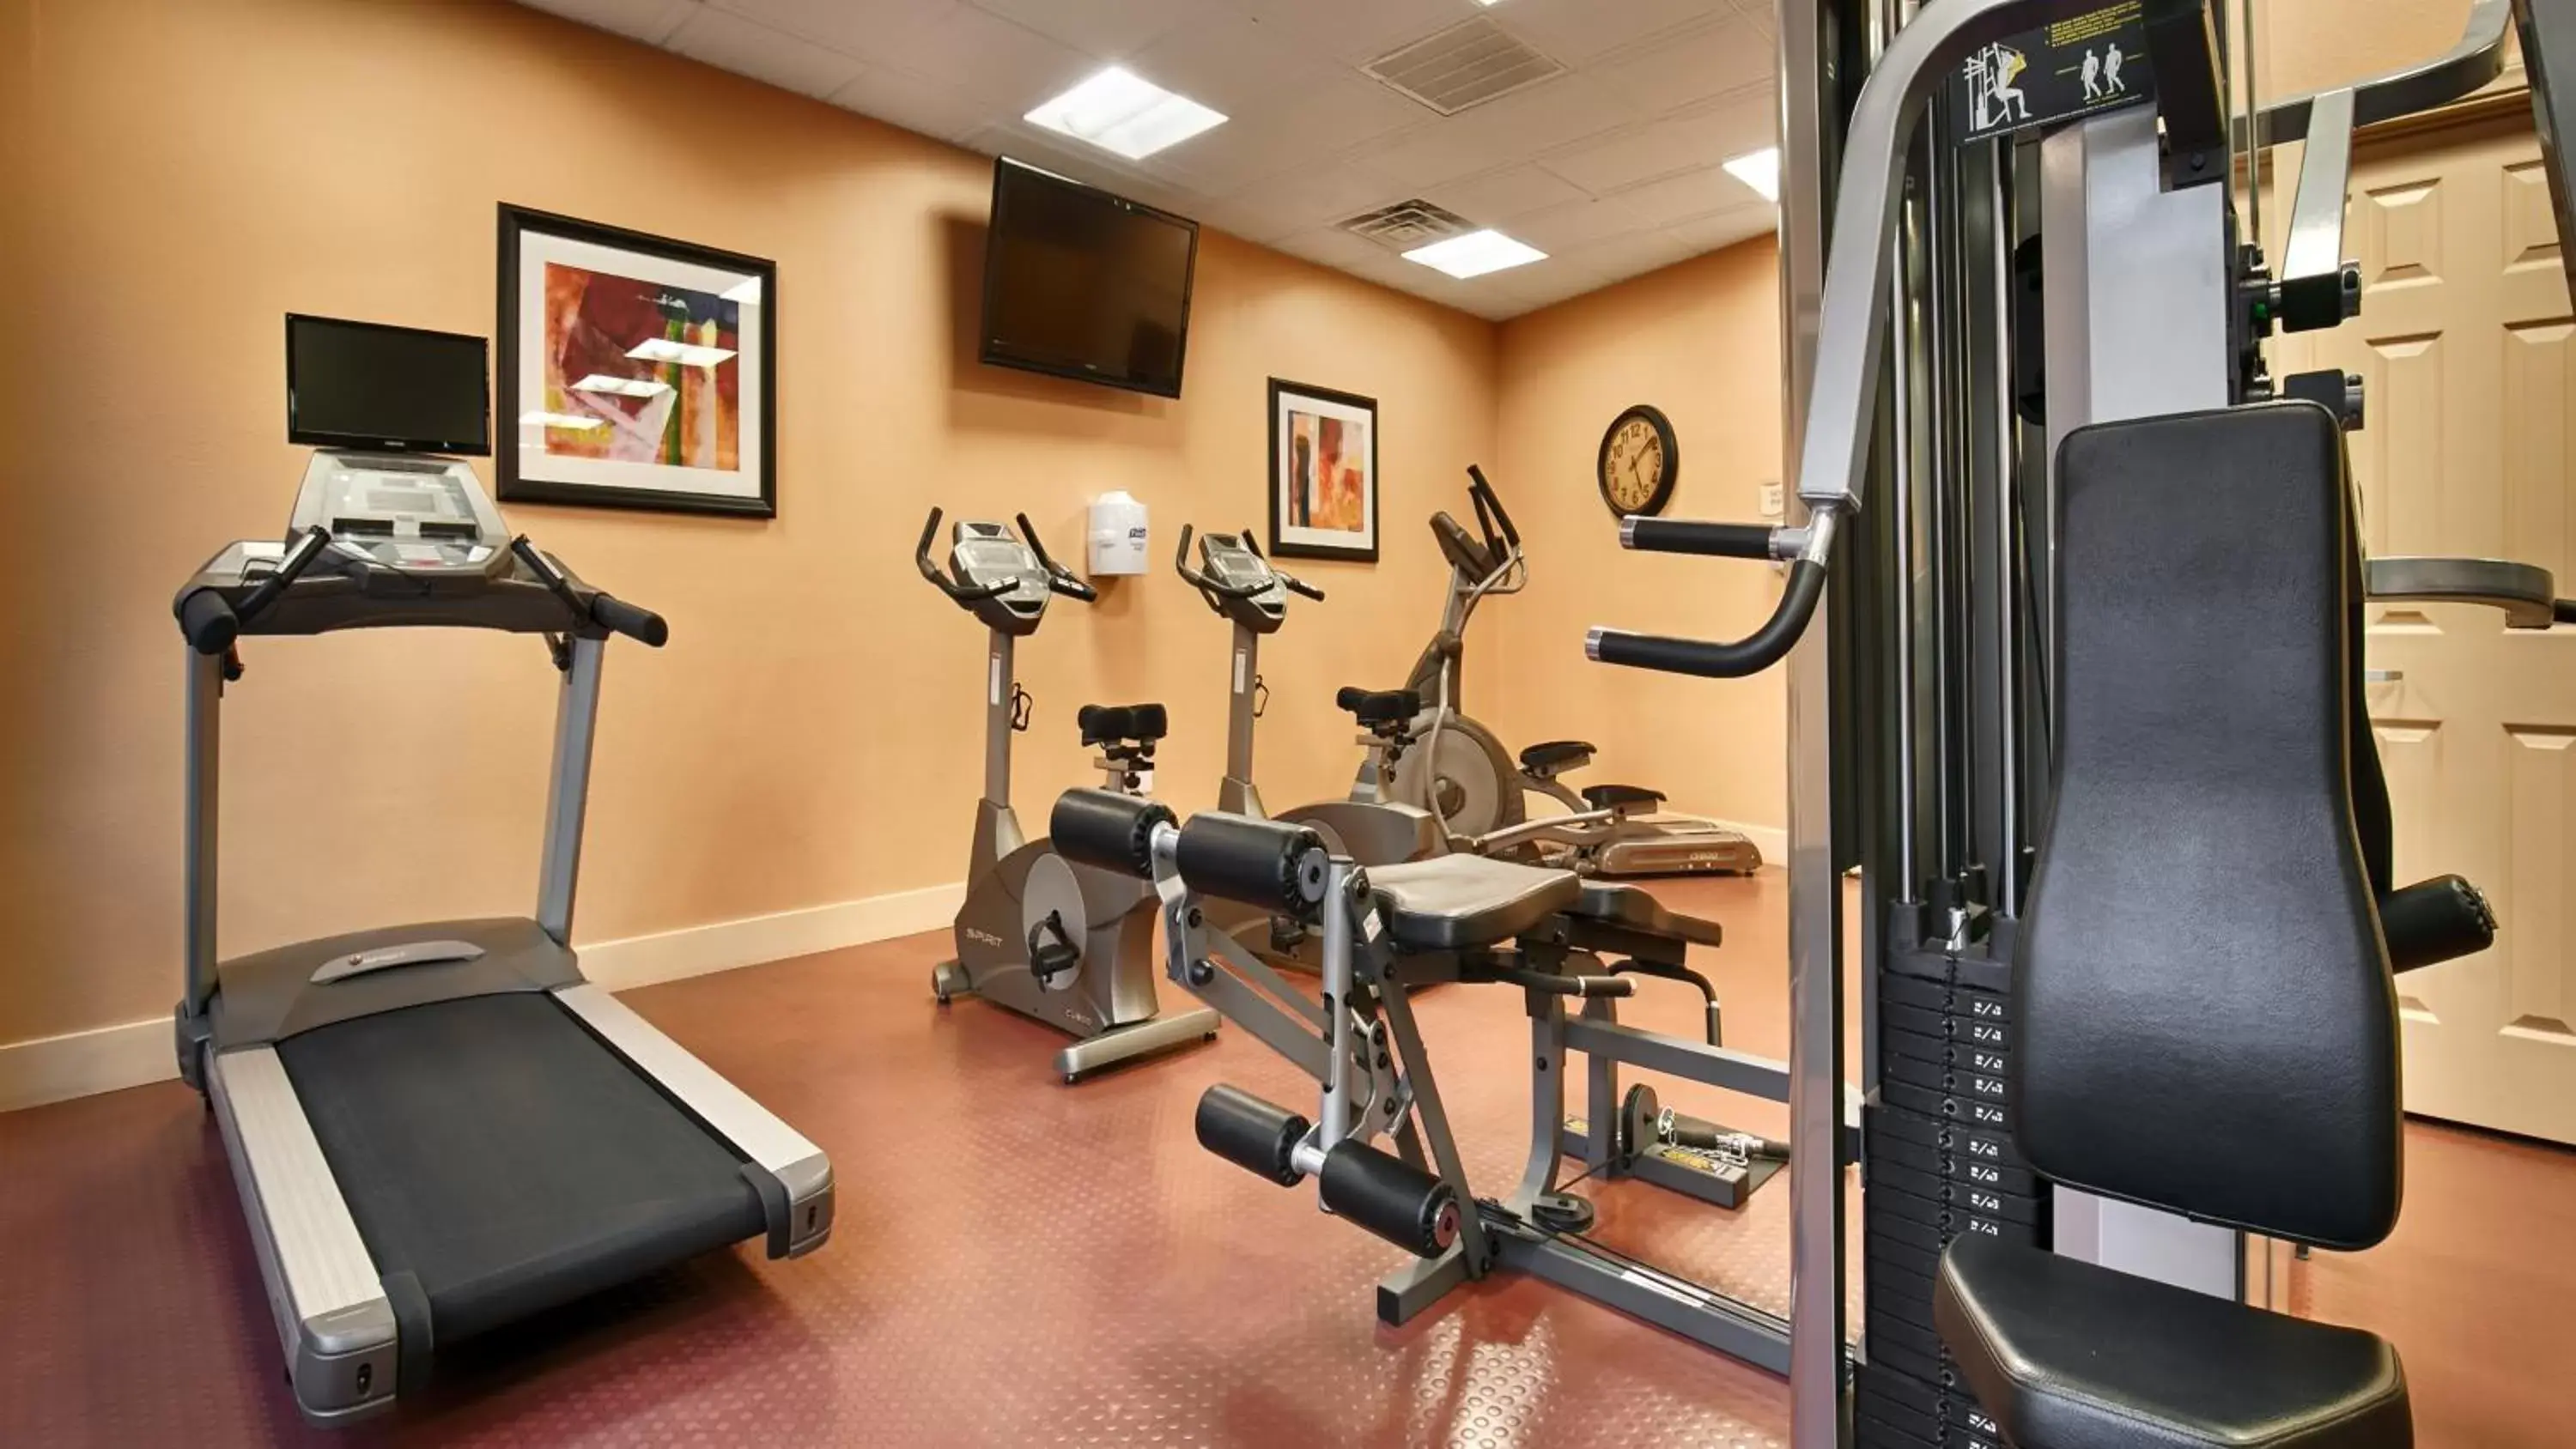 Fitness centre/facilities, Fitness Center/Facilities in Best Western Plus Casino Royale - Center Strip